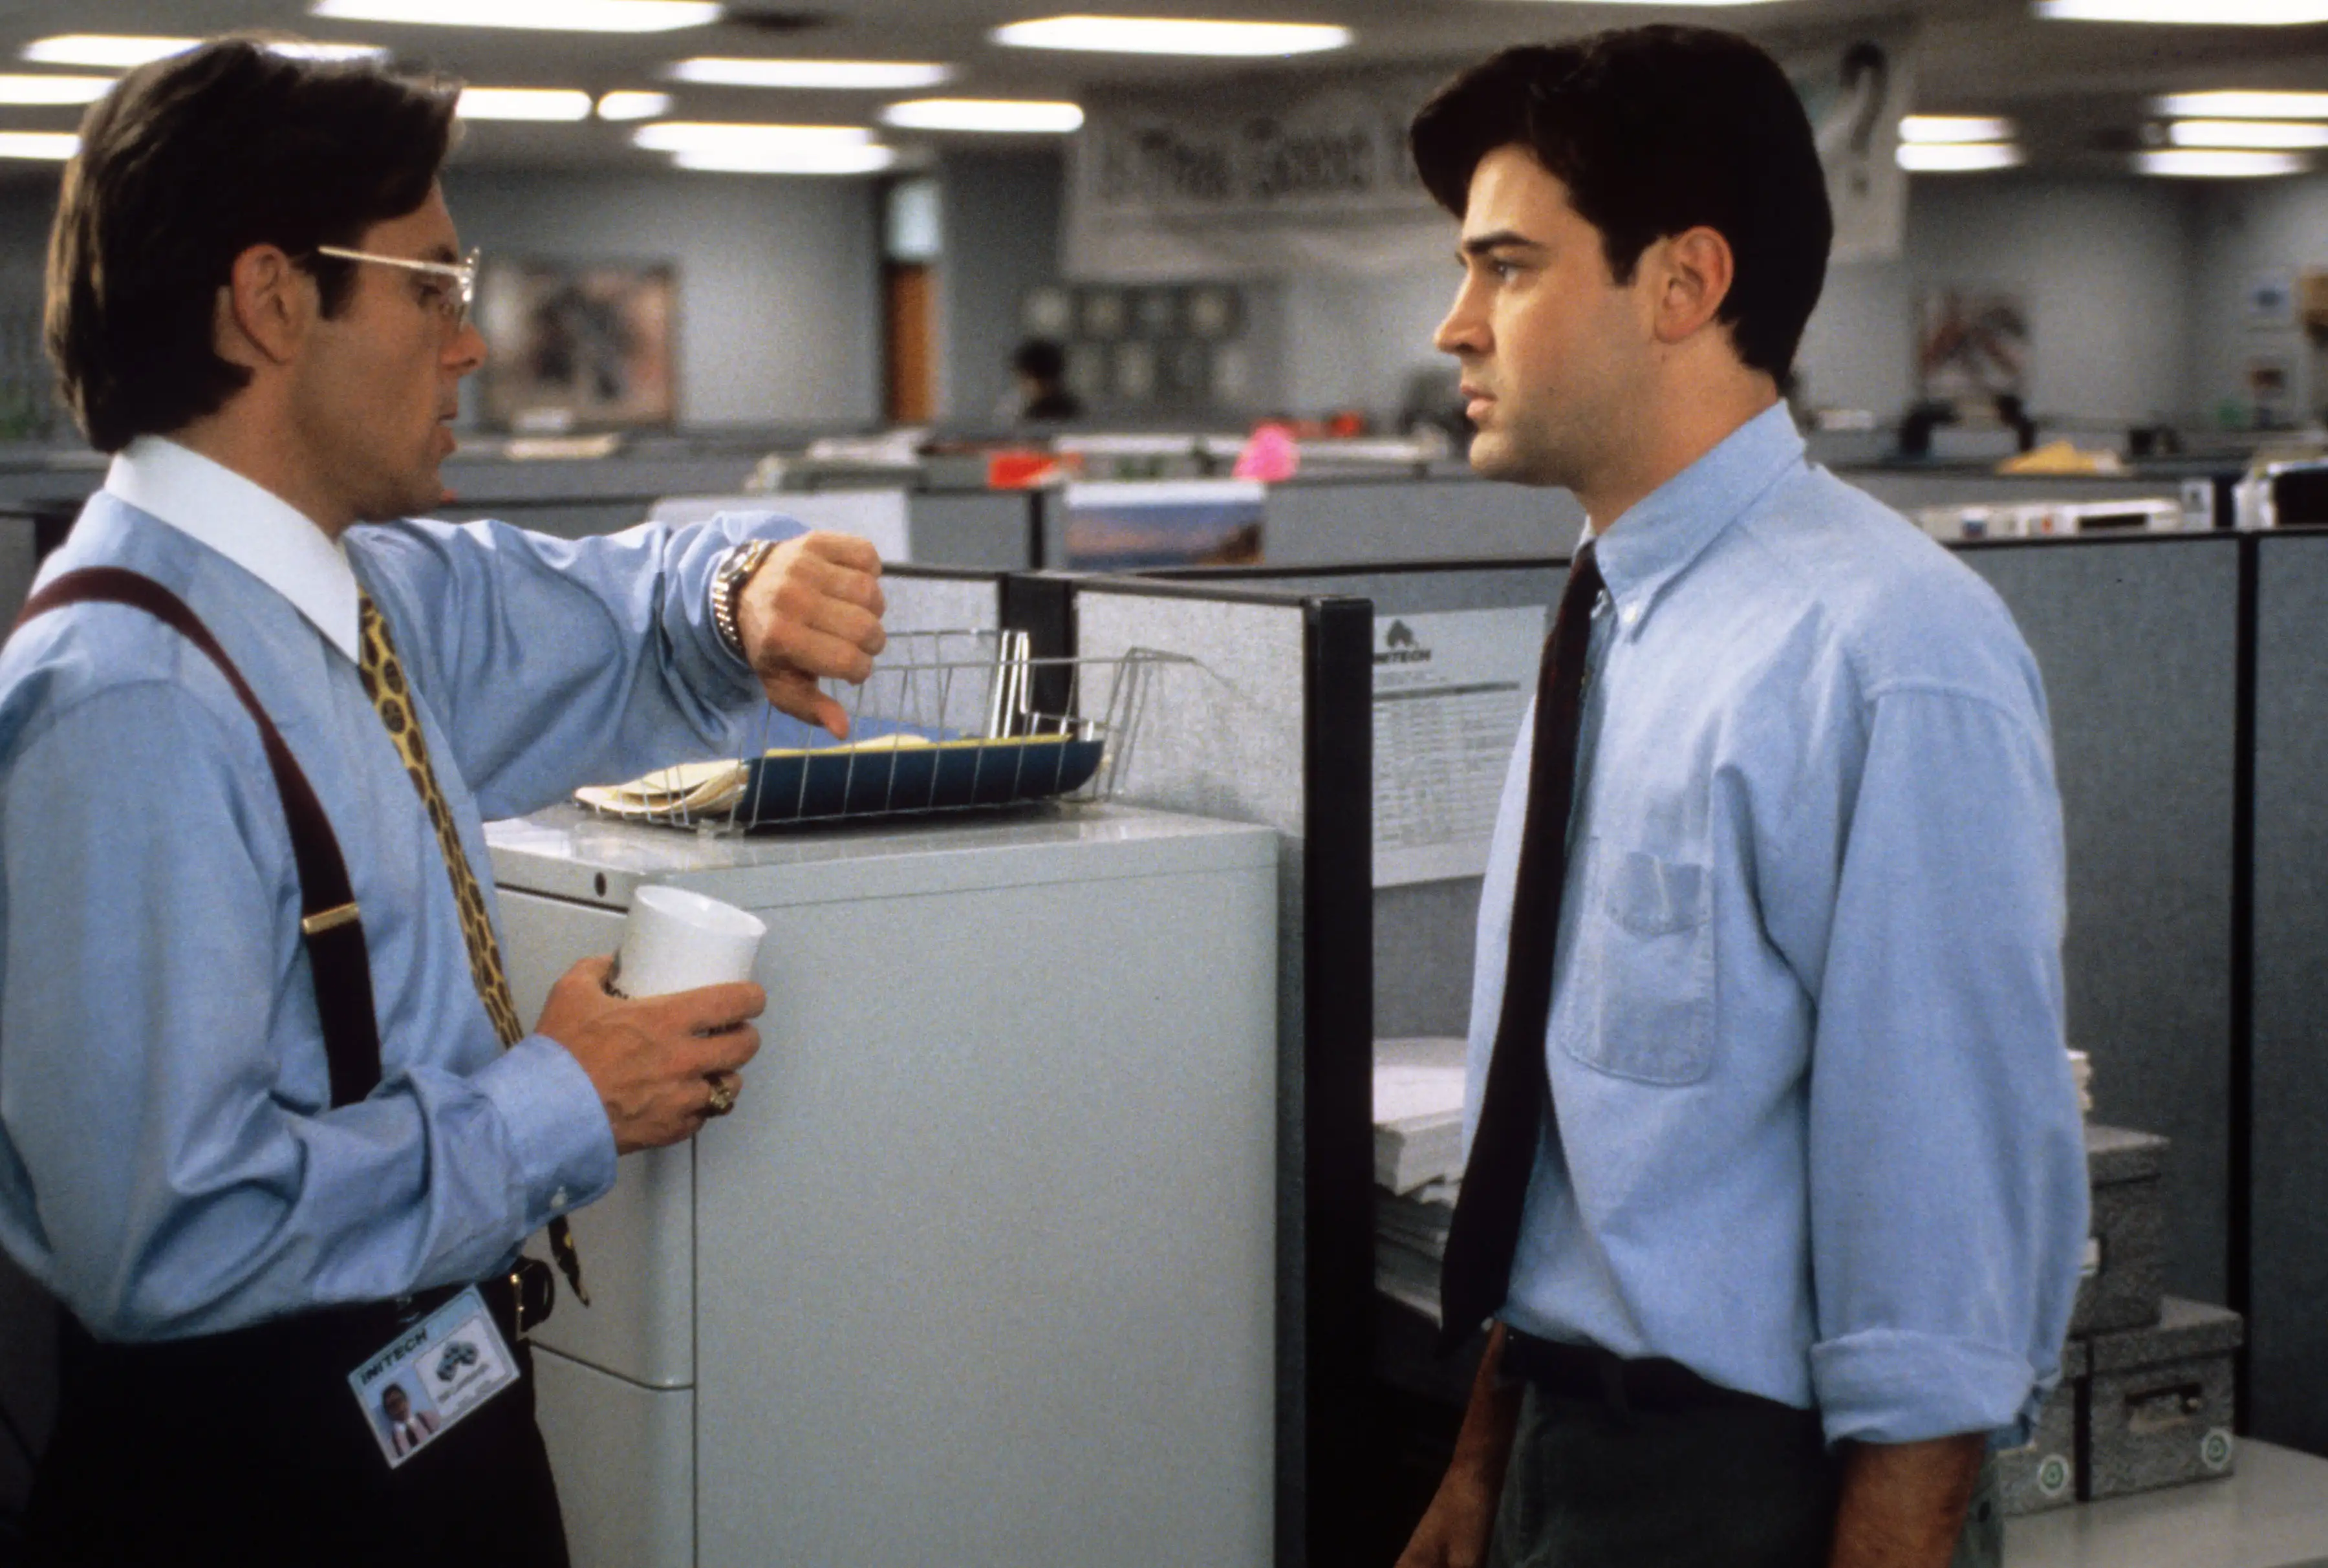 OFFICE SPACE, Gary Cole, Ron Livingston, 1999.